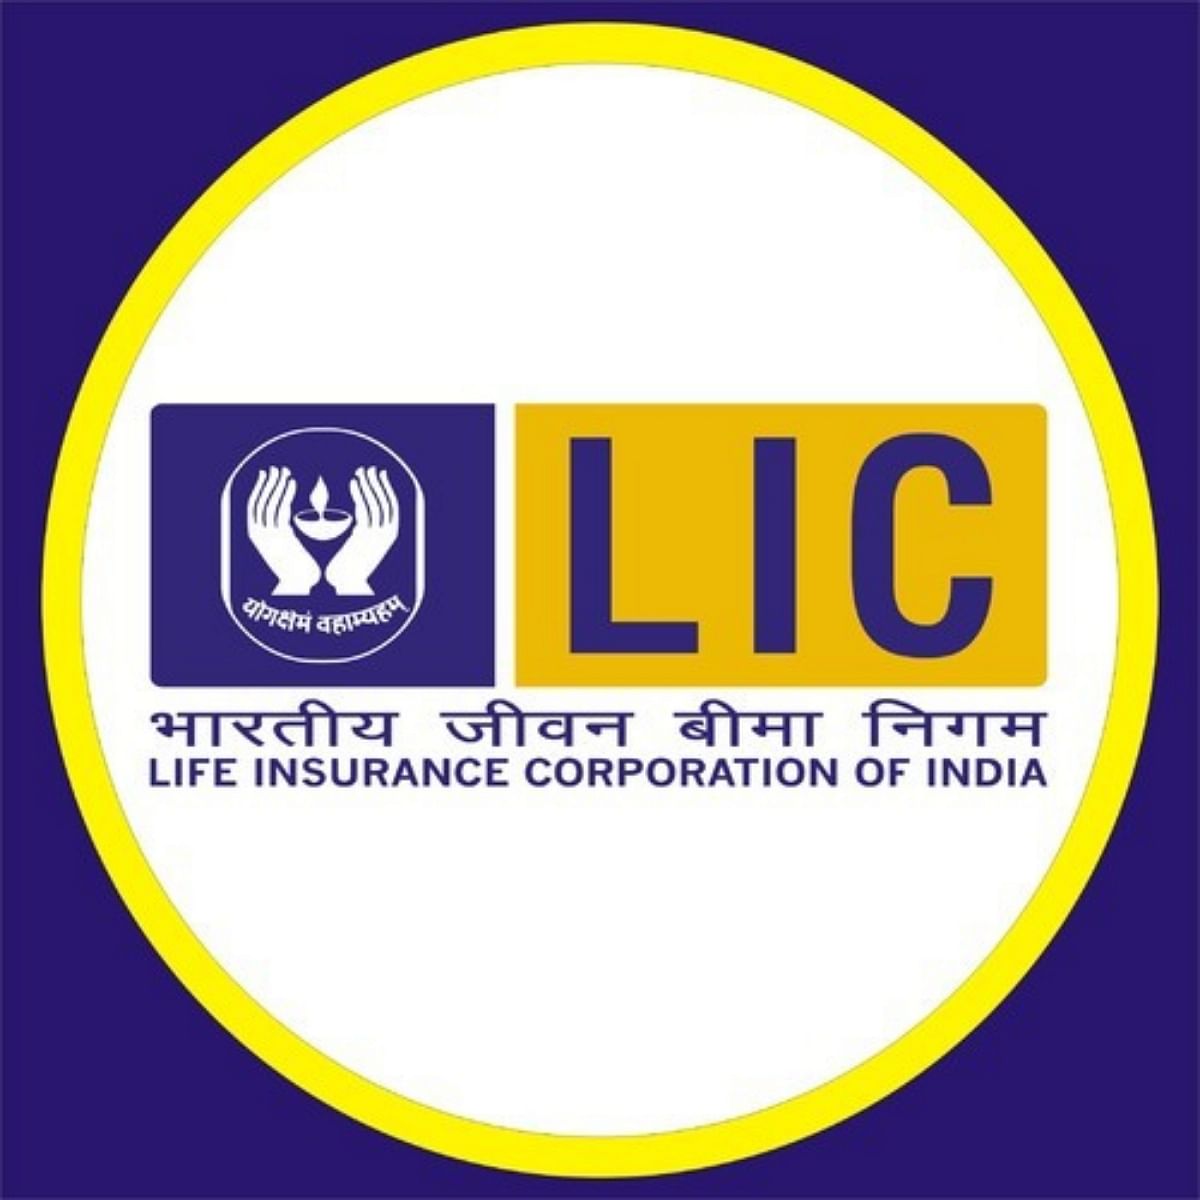 LIC Assistant Mains 2019 Scorecard Released, Here's Direct Link to Check